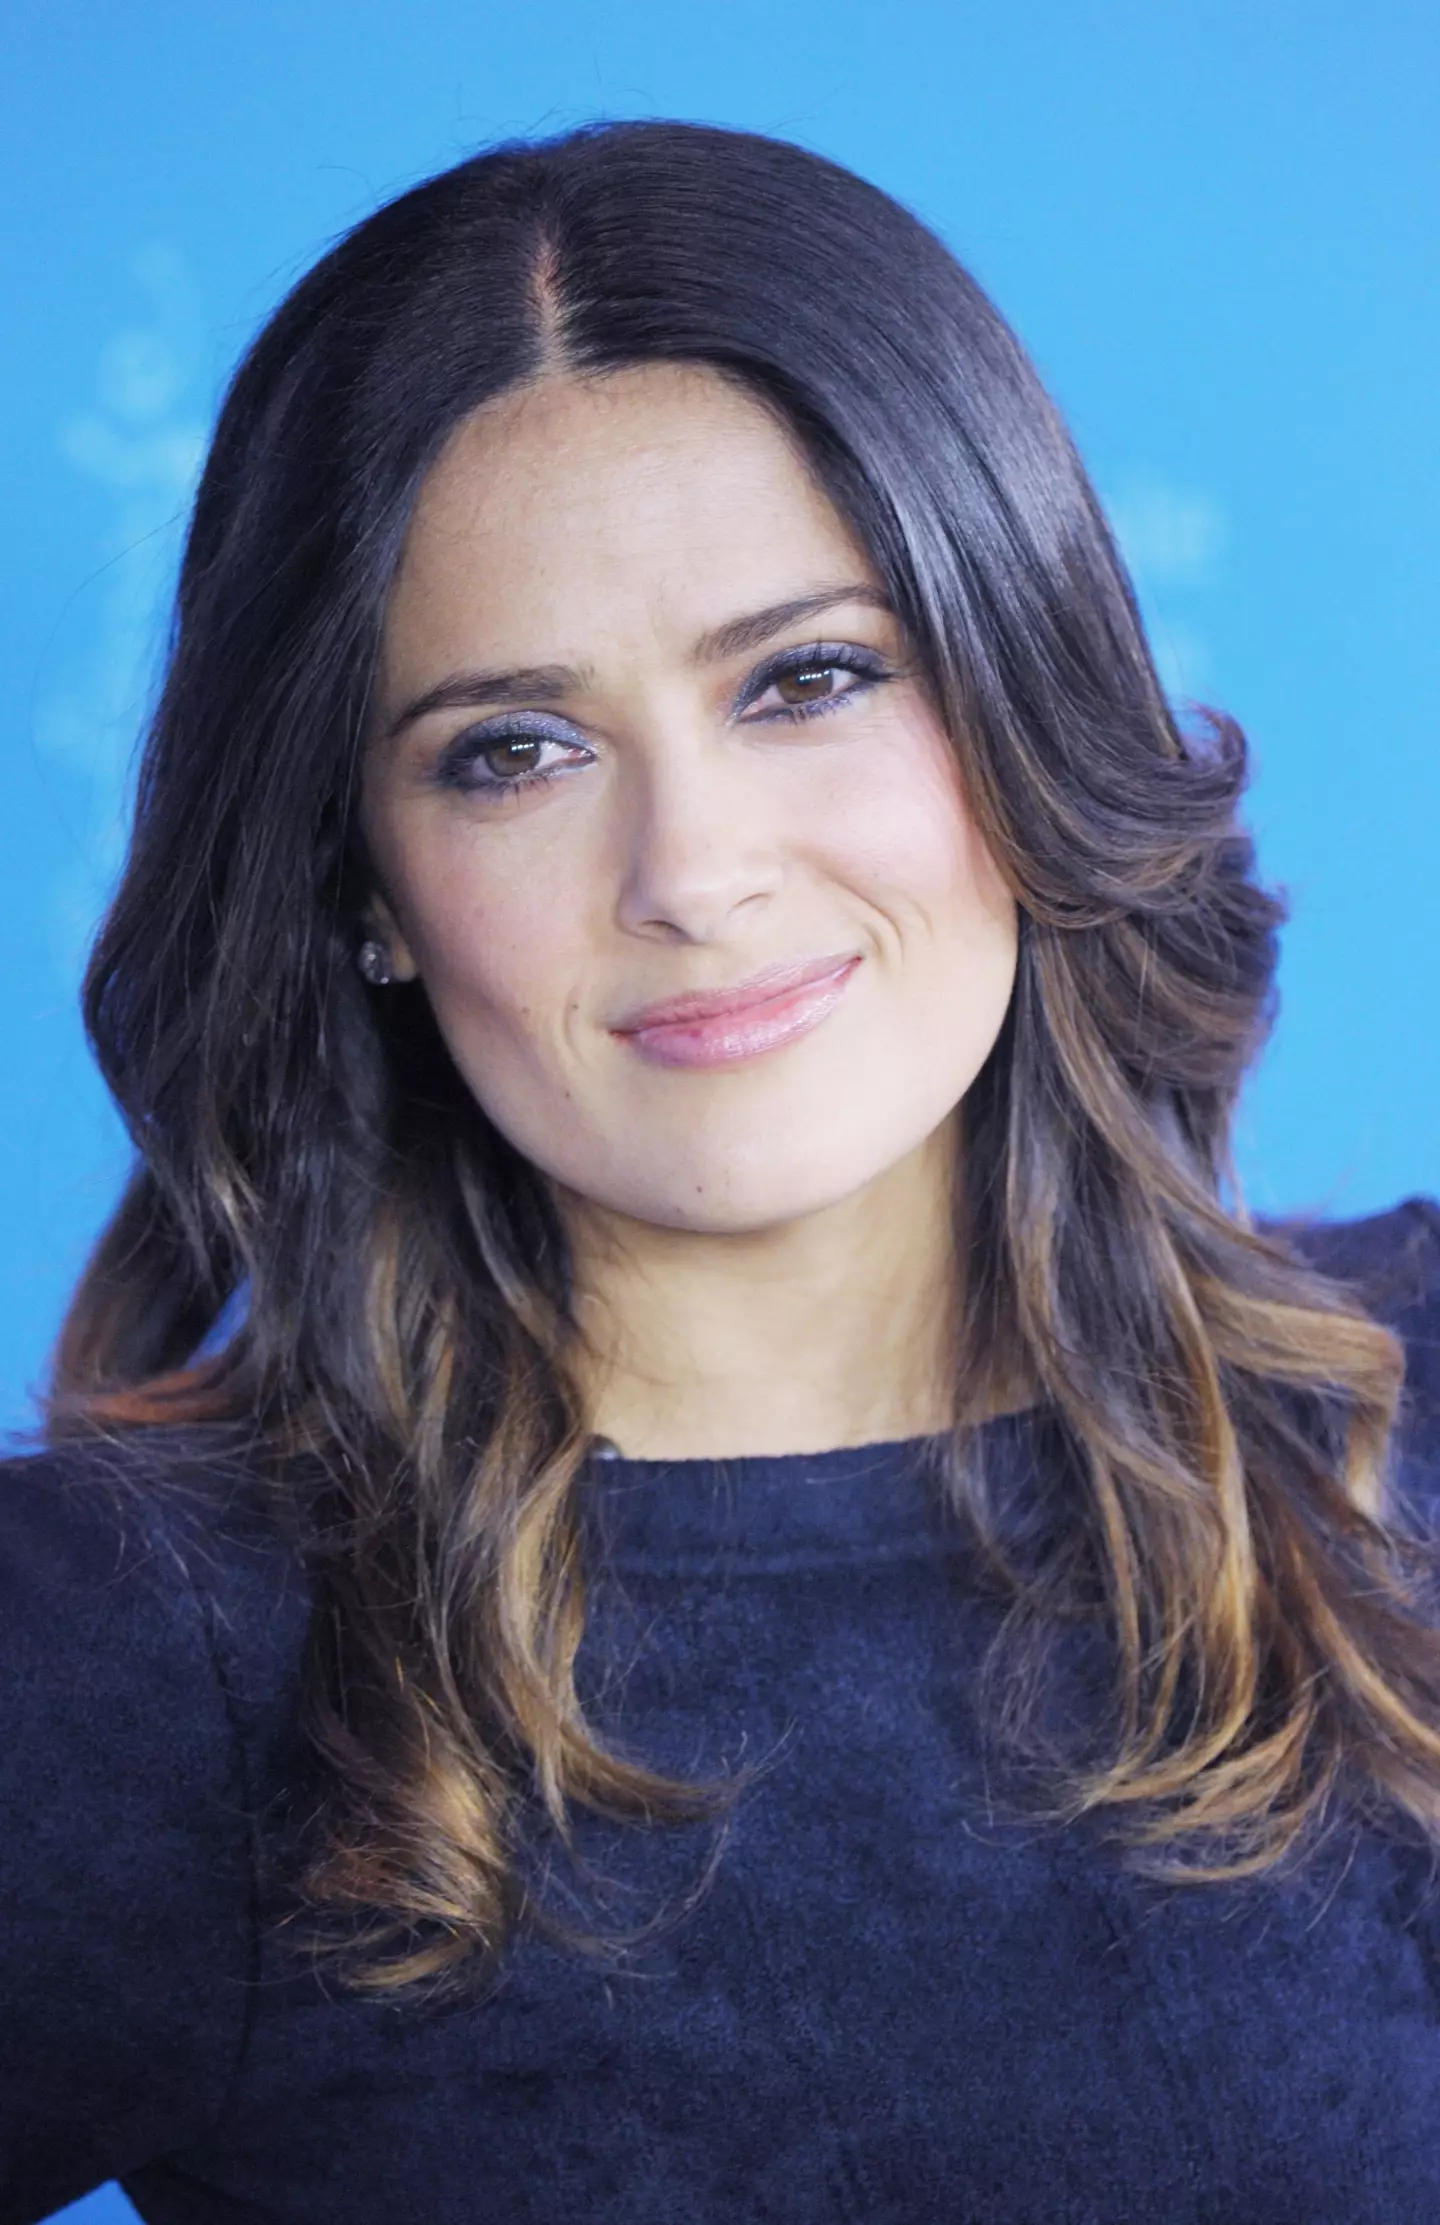 One skincare expert wouldn't recommend Salma's skincare routine.